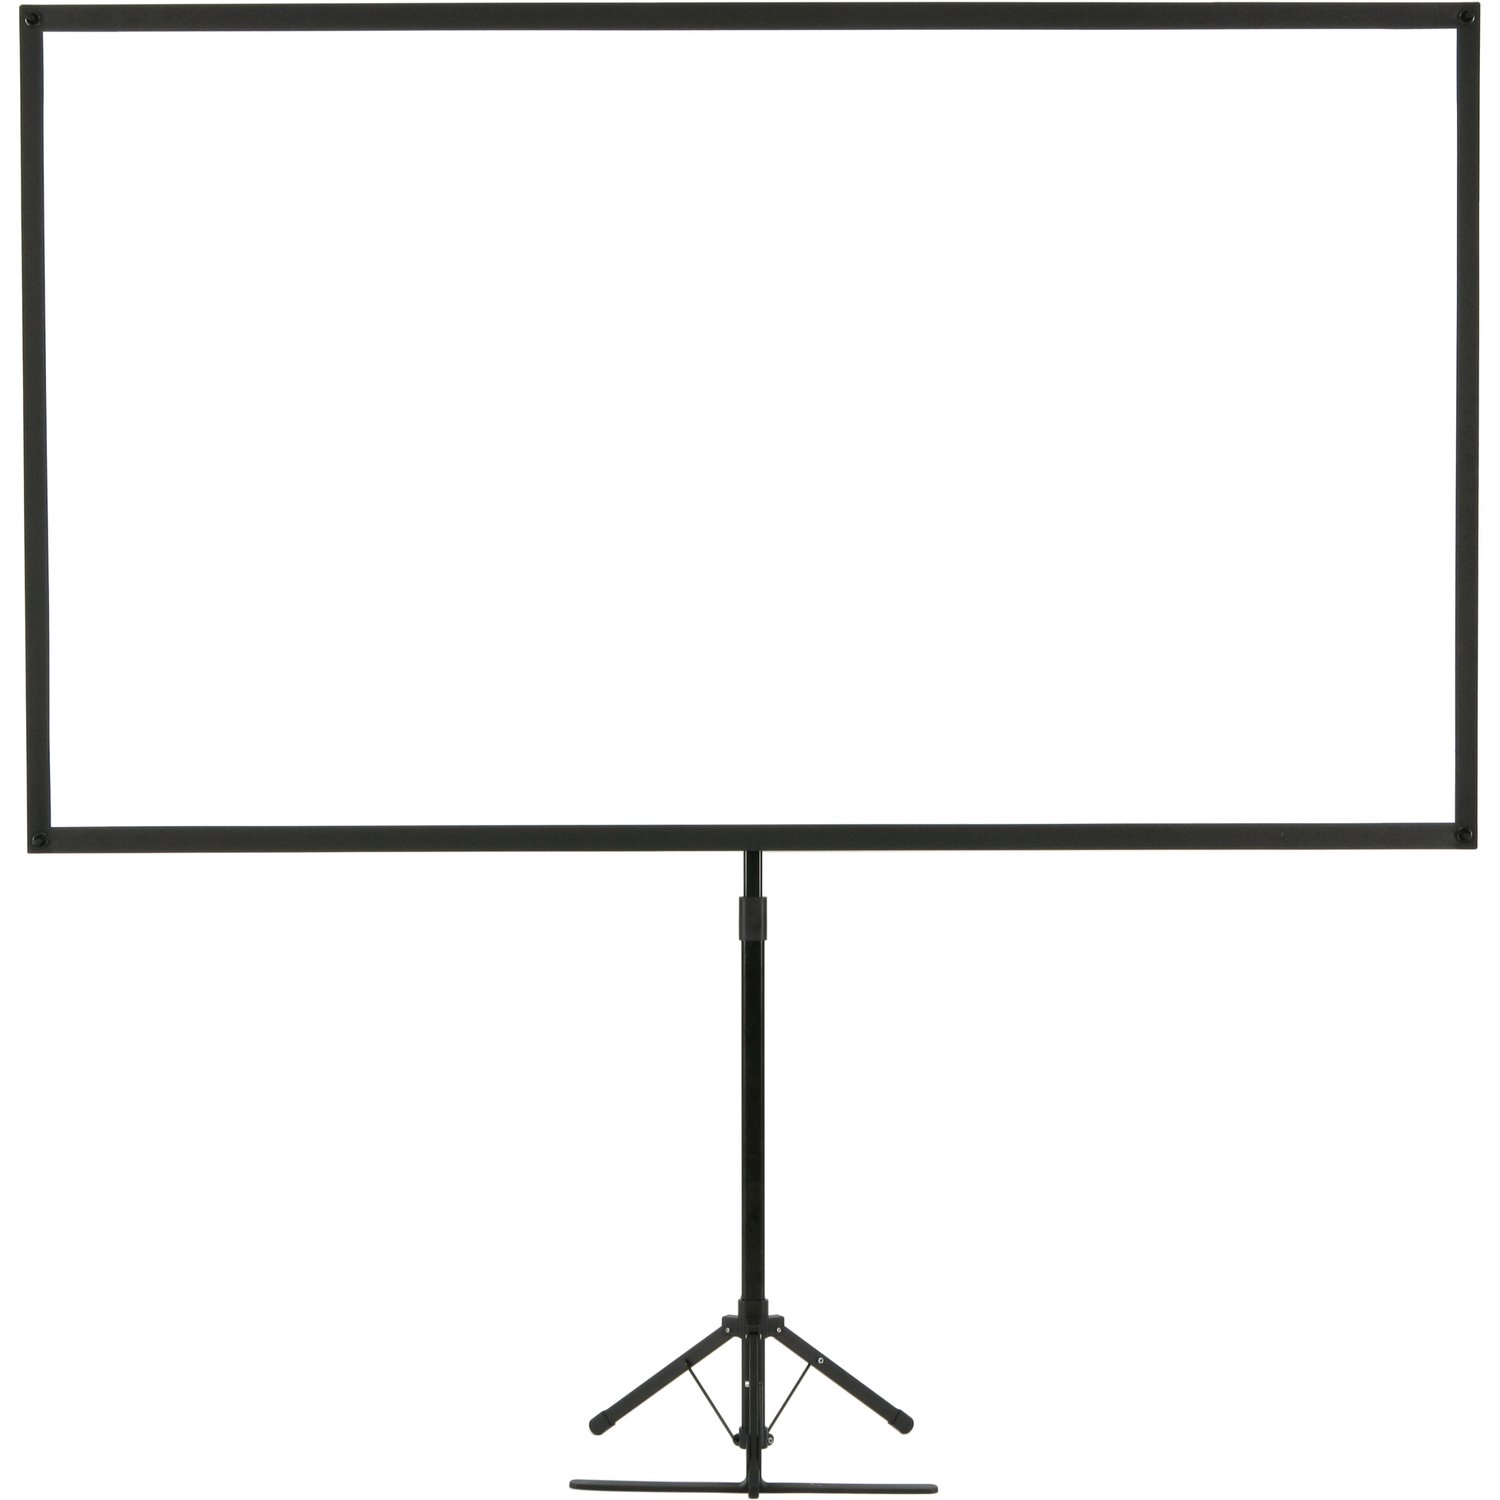 Epson 203.2 cm (80") Projection Screen